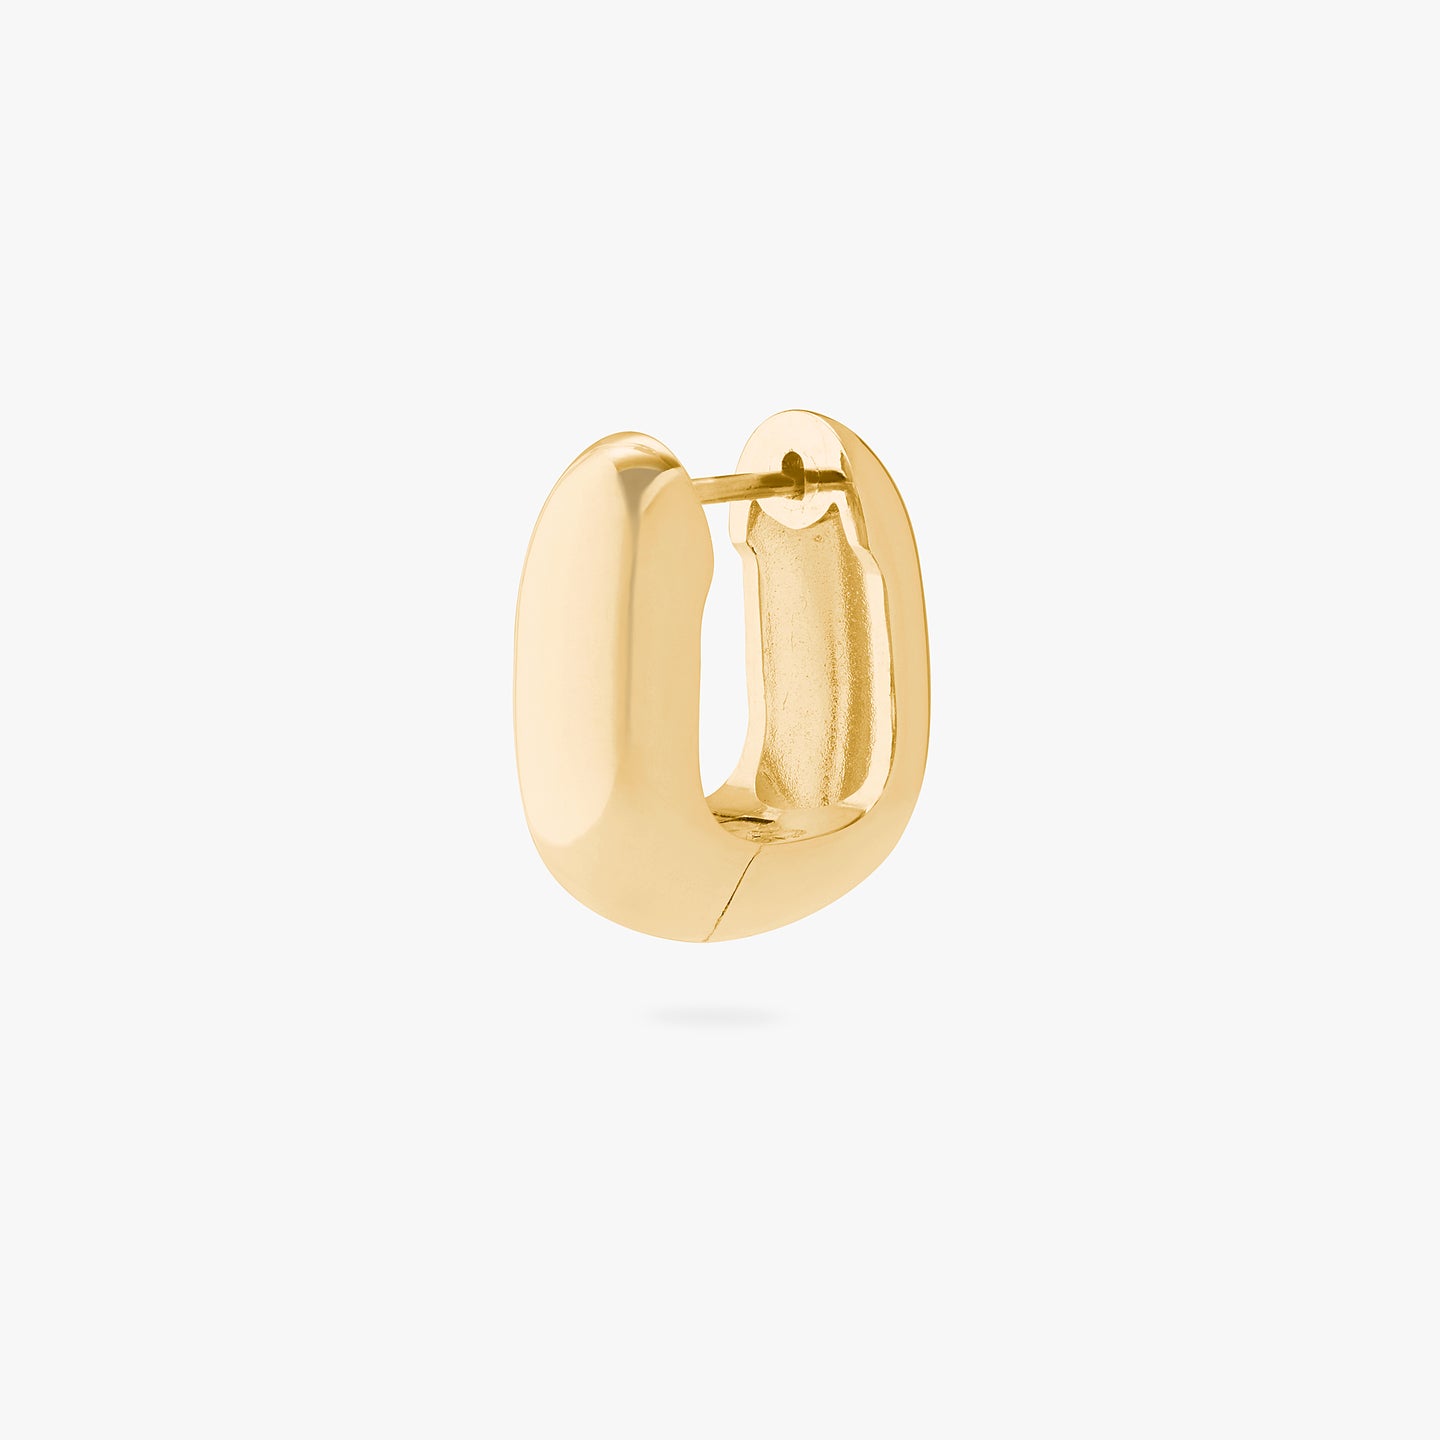 An image of a gold, chunky, square shaped huggie. color:null|gold